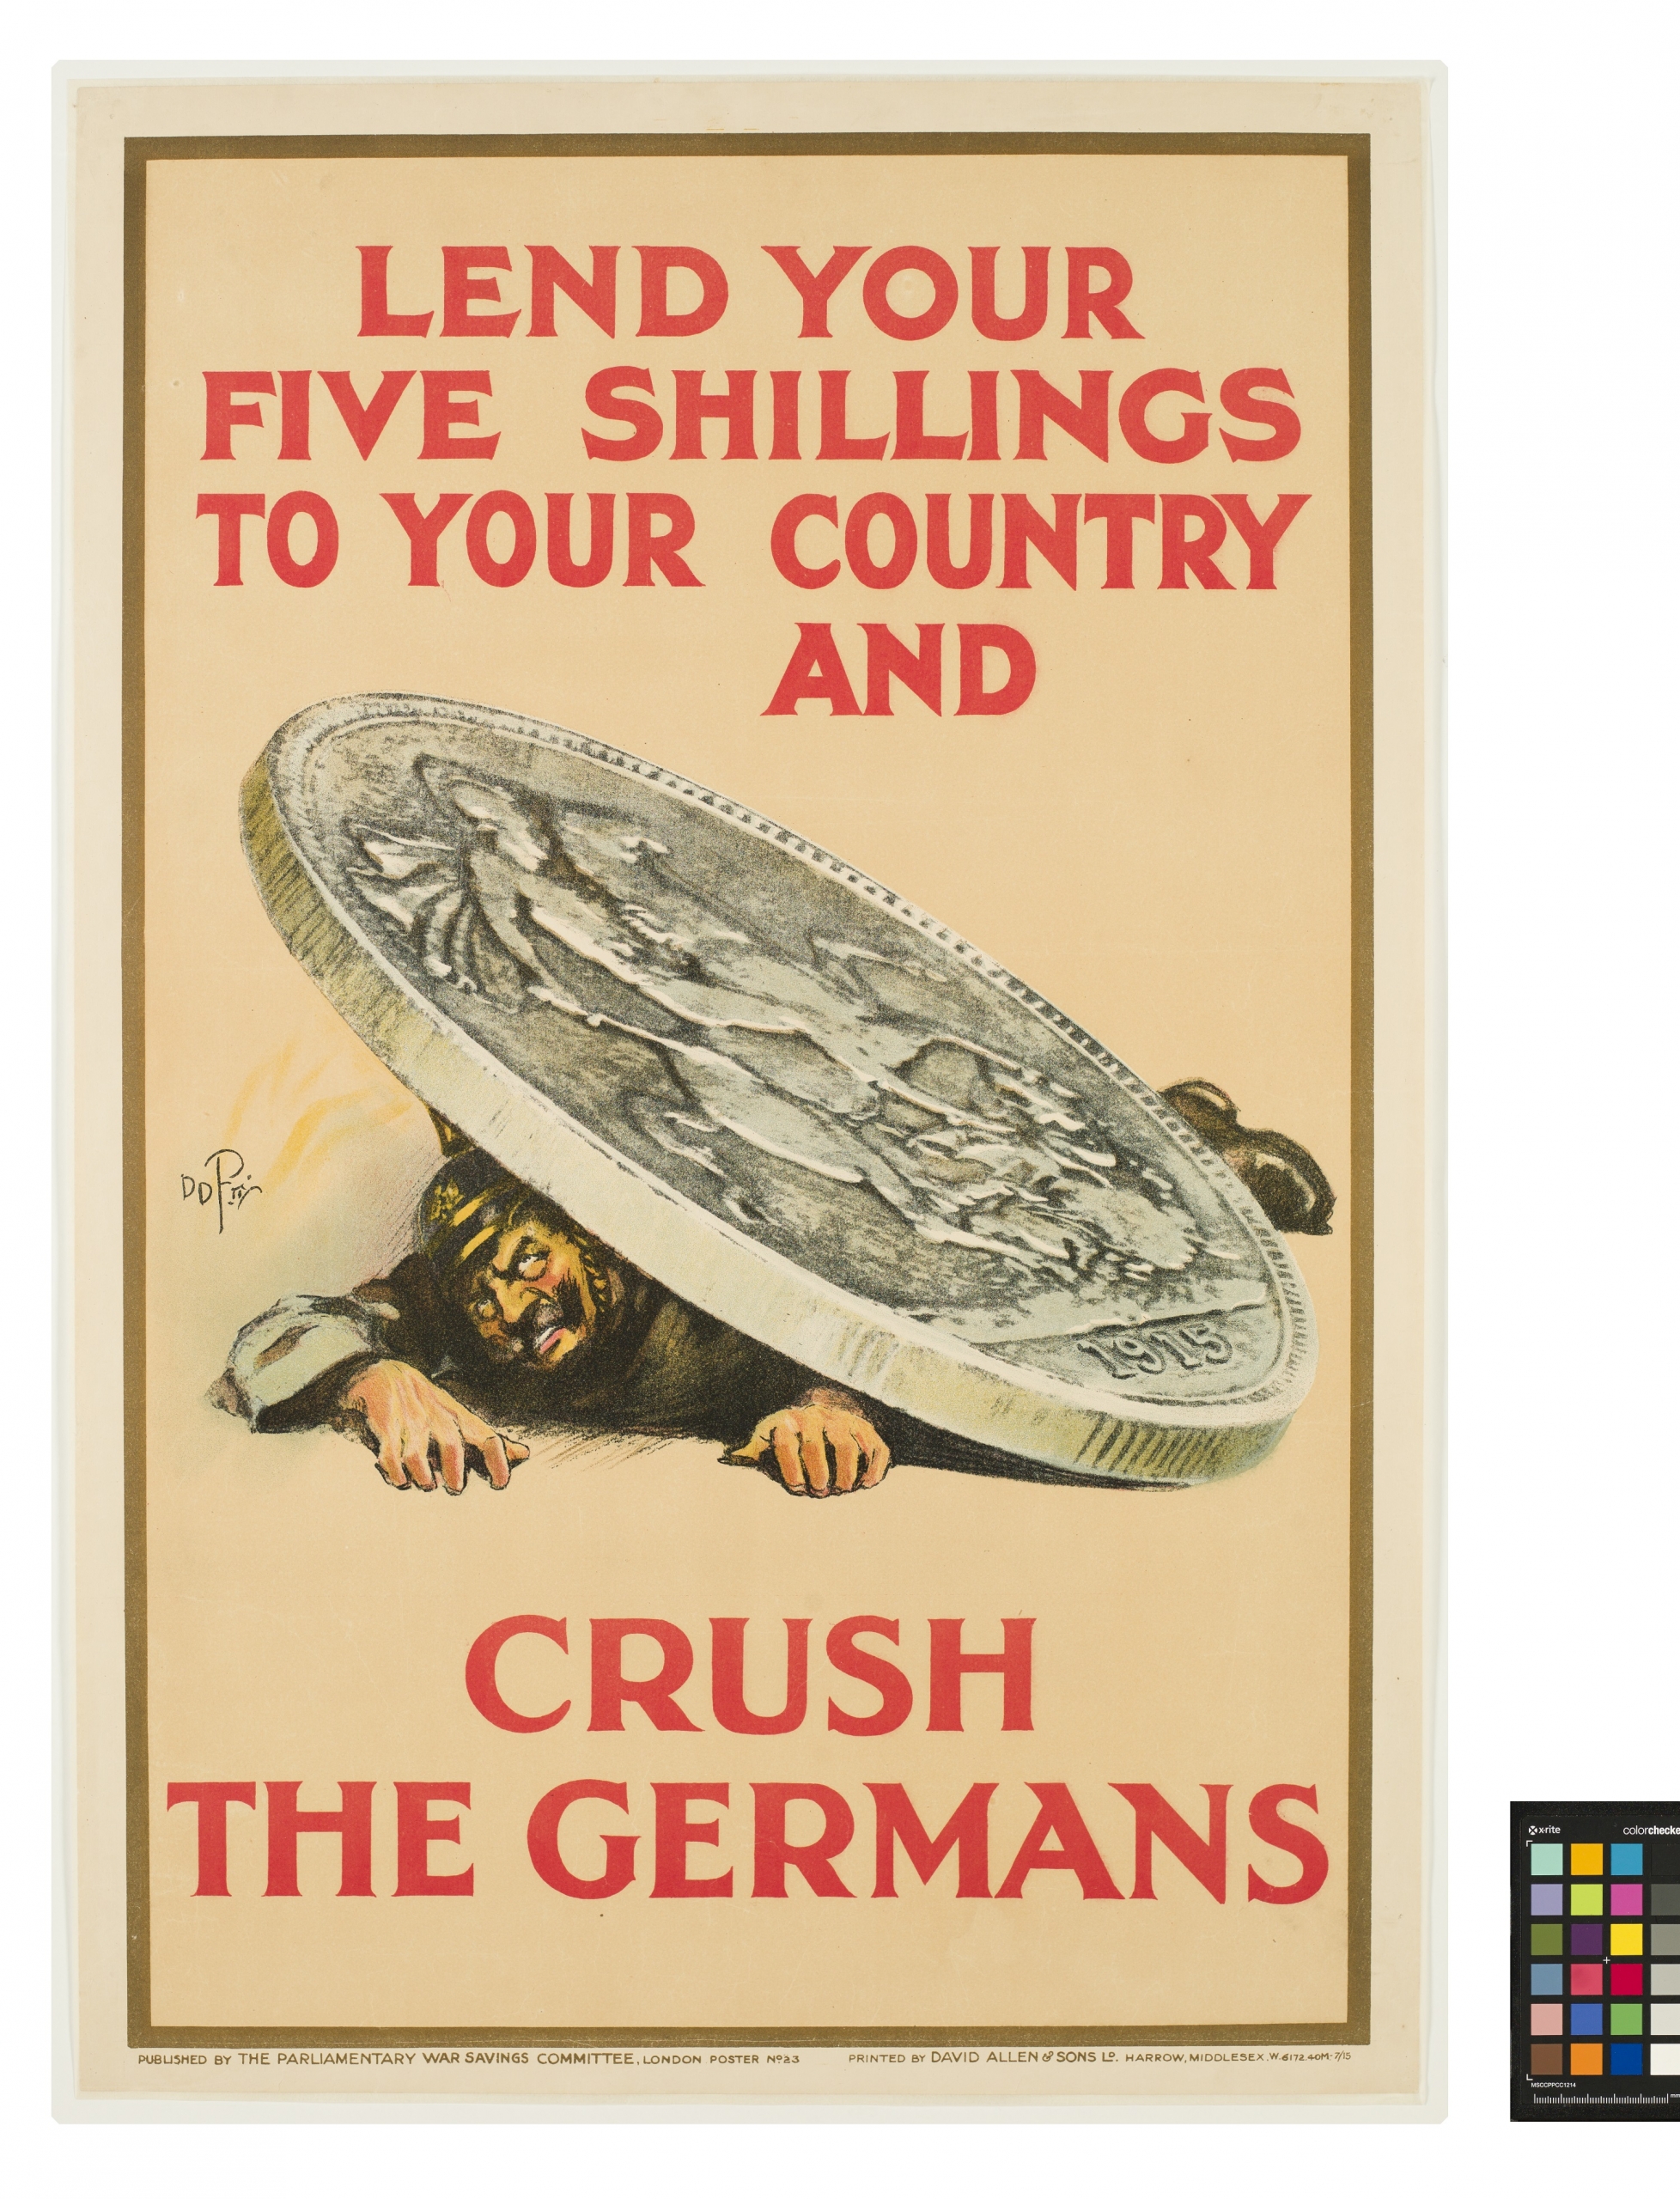 Hand-drawn propaganda poster with a German soldier being crushed under a large coin.